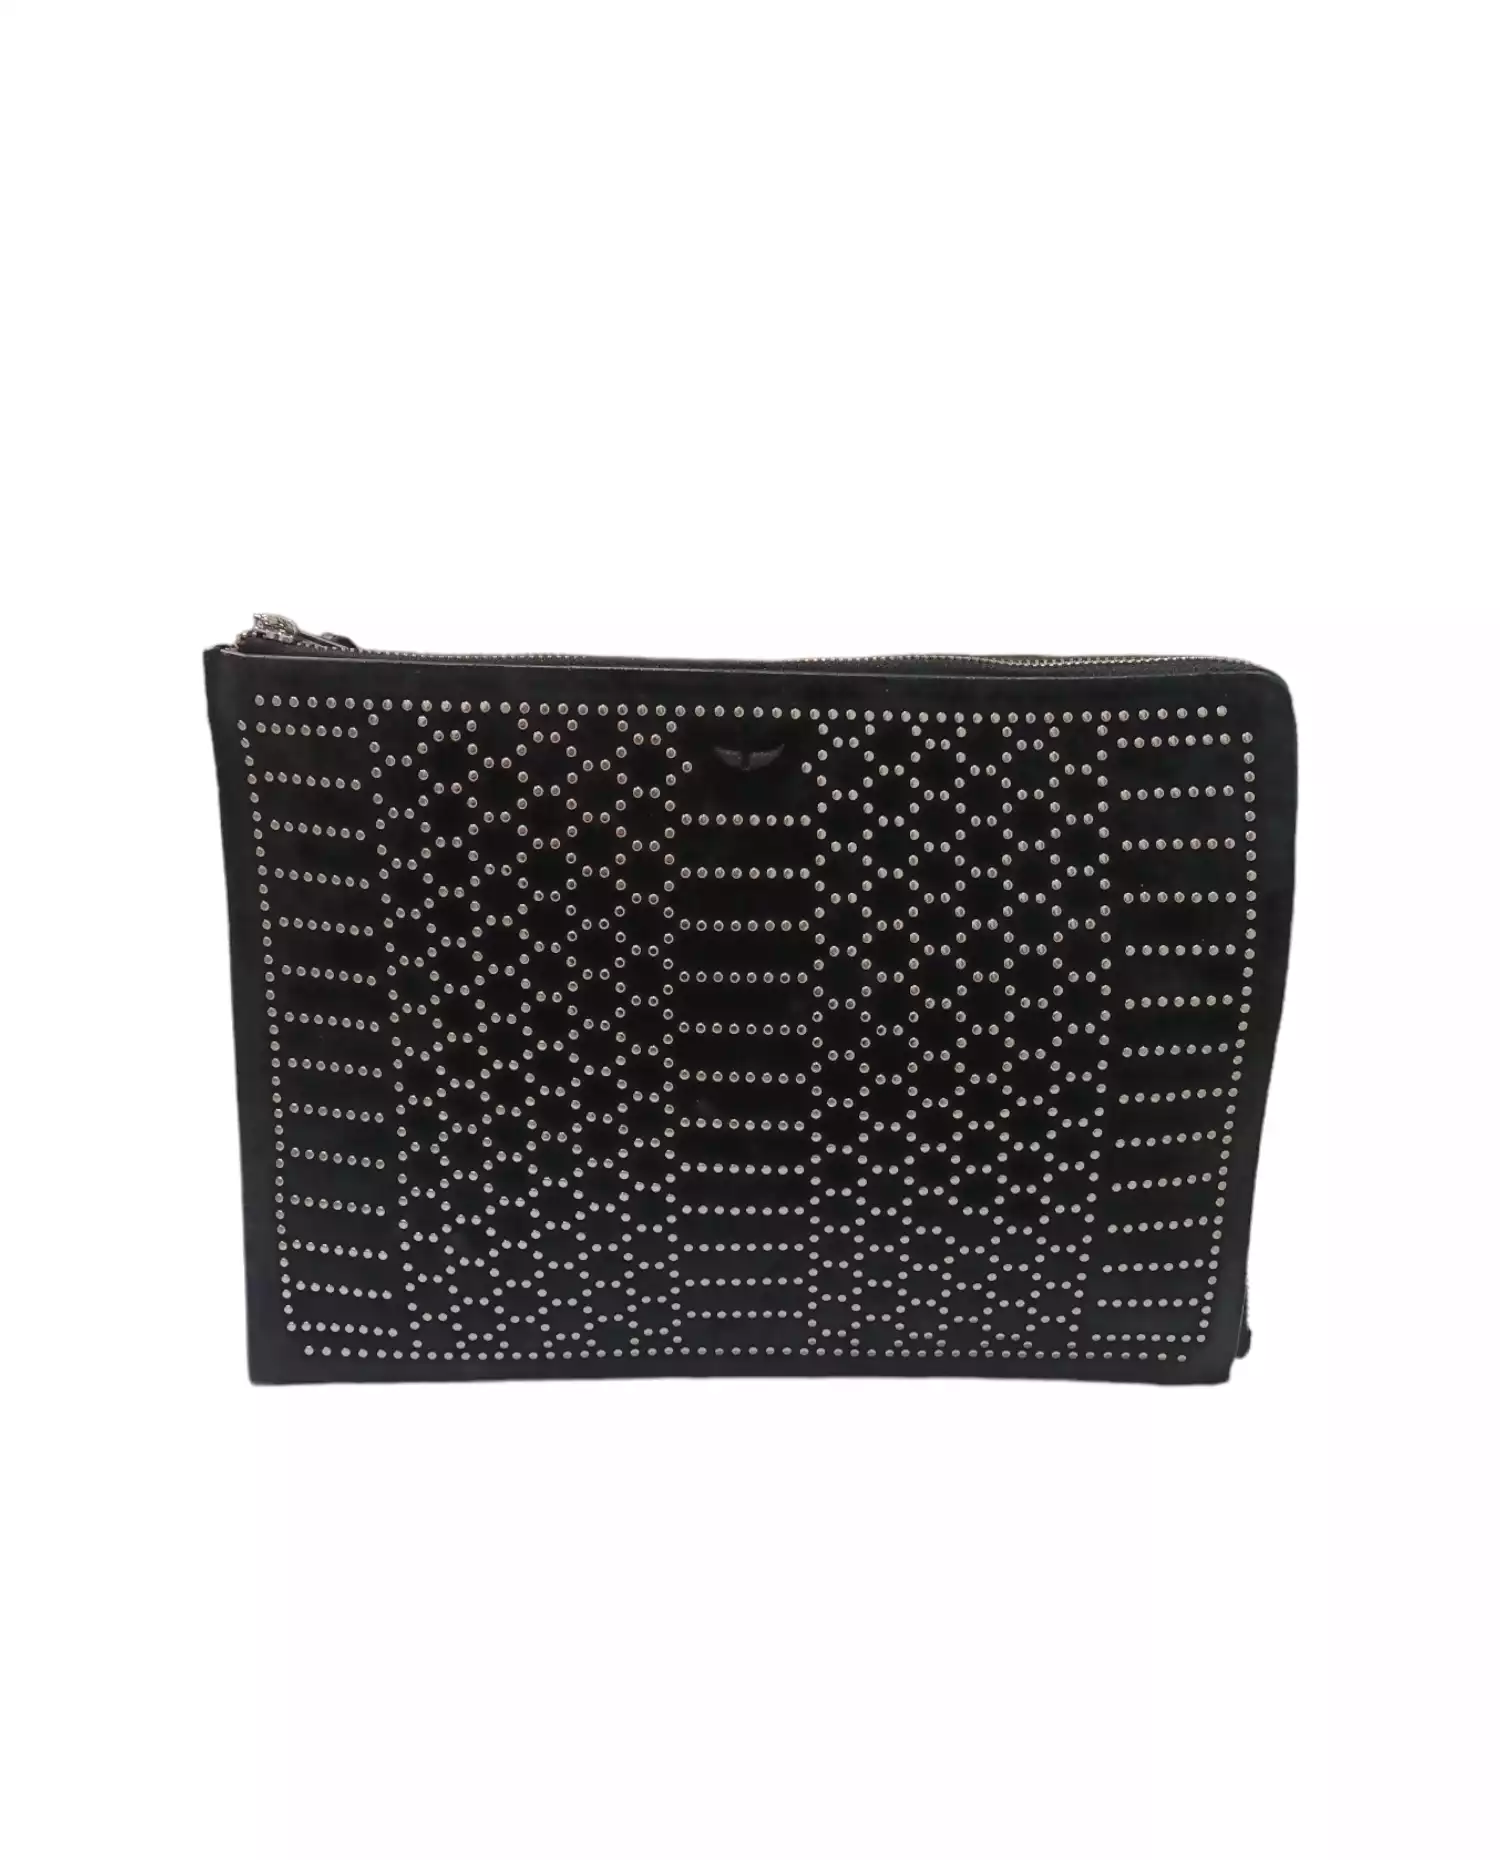 Clutch Bag by Zadig & Voltaire